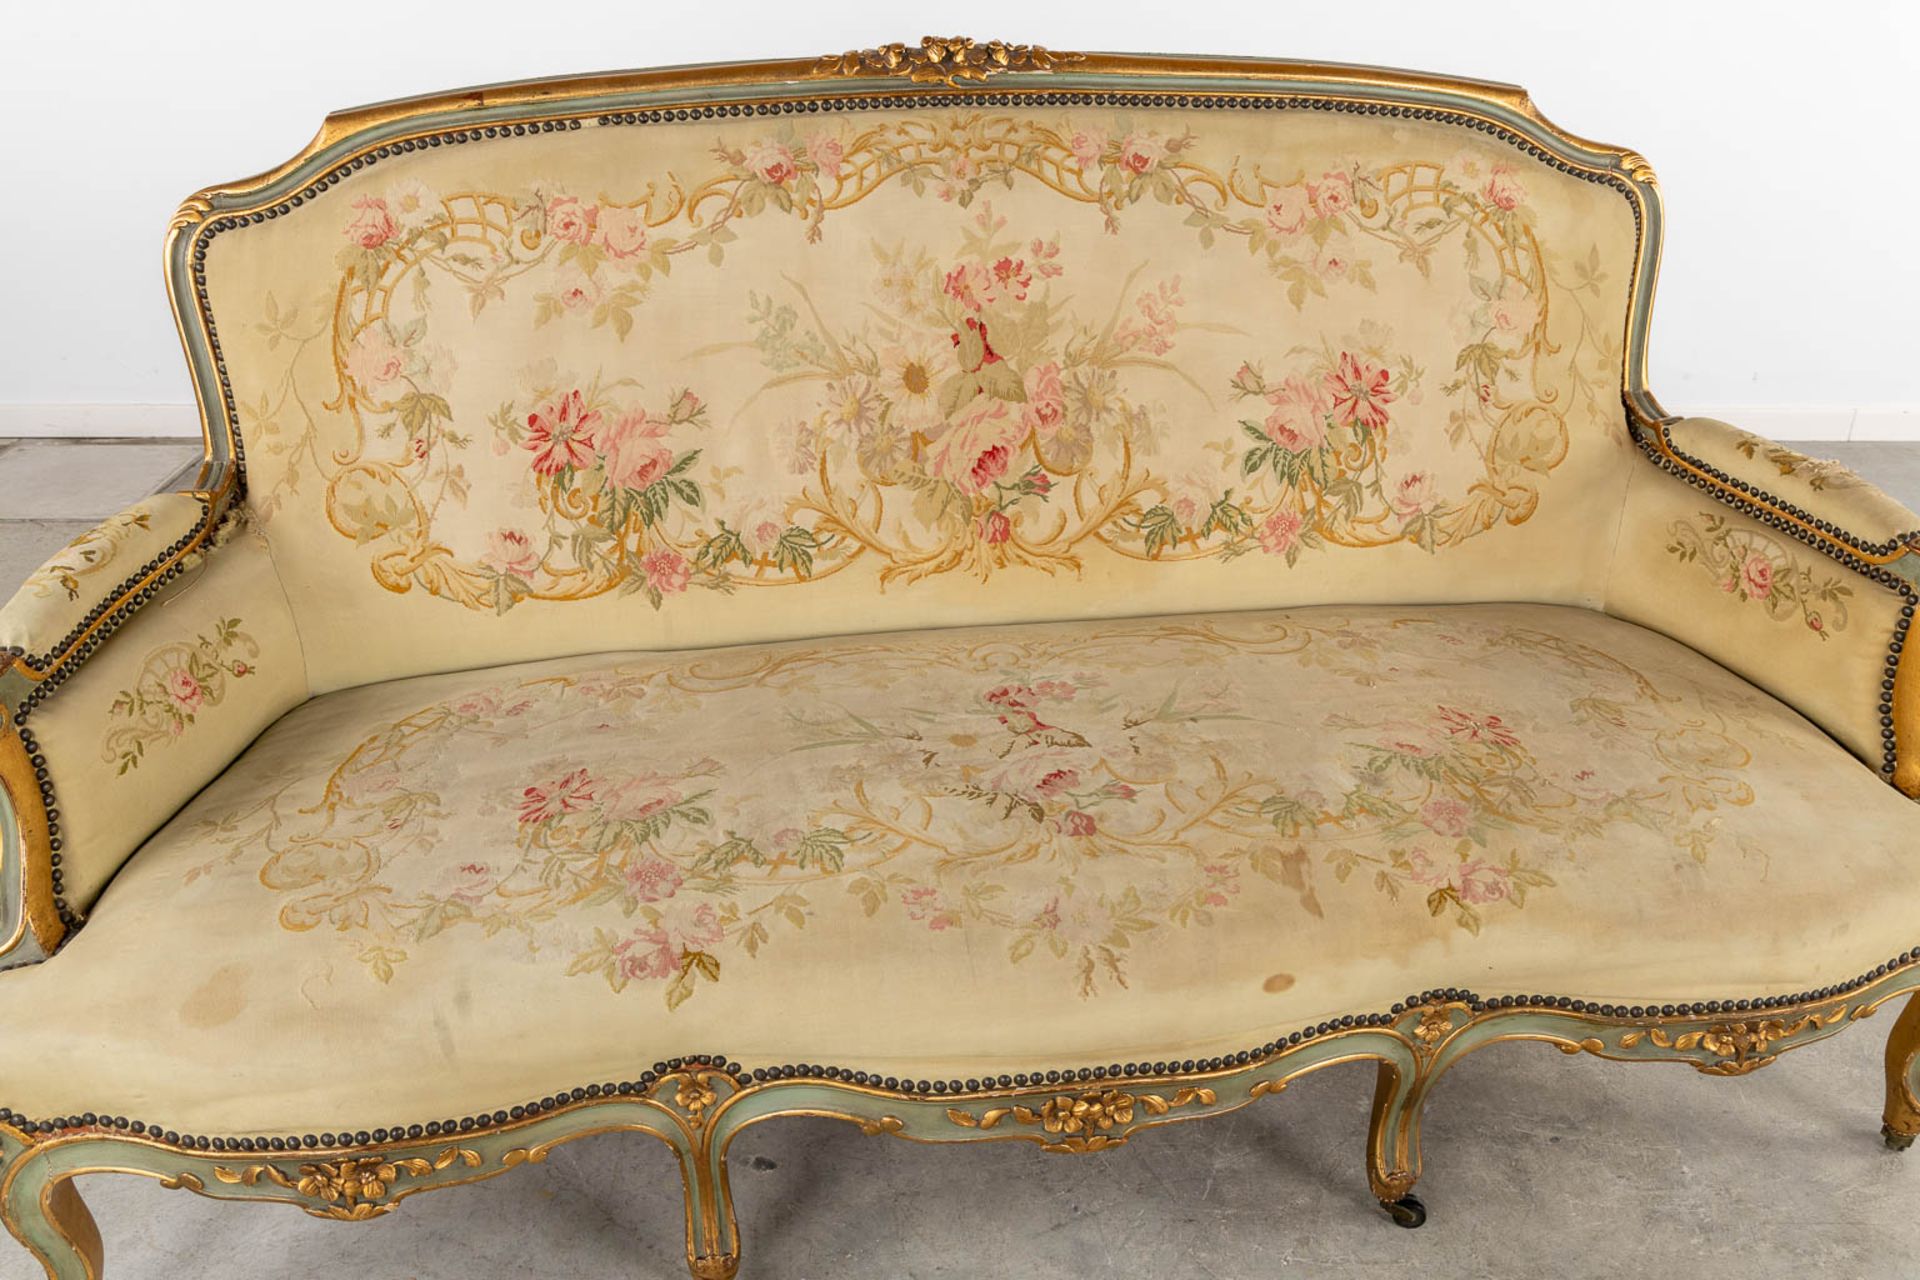 A Louis XV style sofa, upholstered with flower embroideries. (L:80 x W:175 x H:96 cm) - Bild 8 aus 11